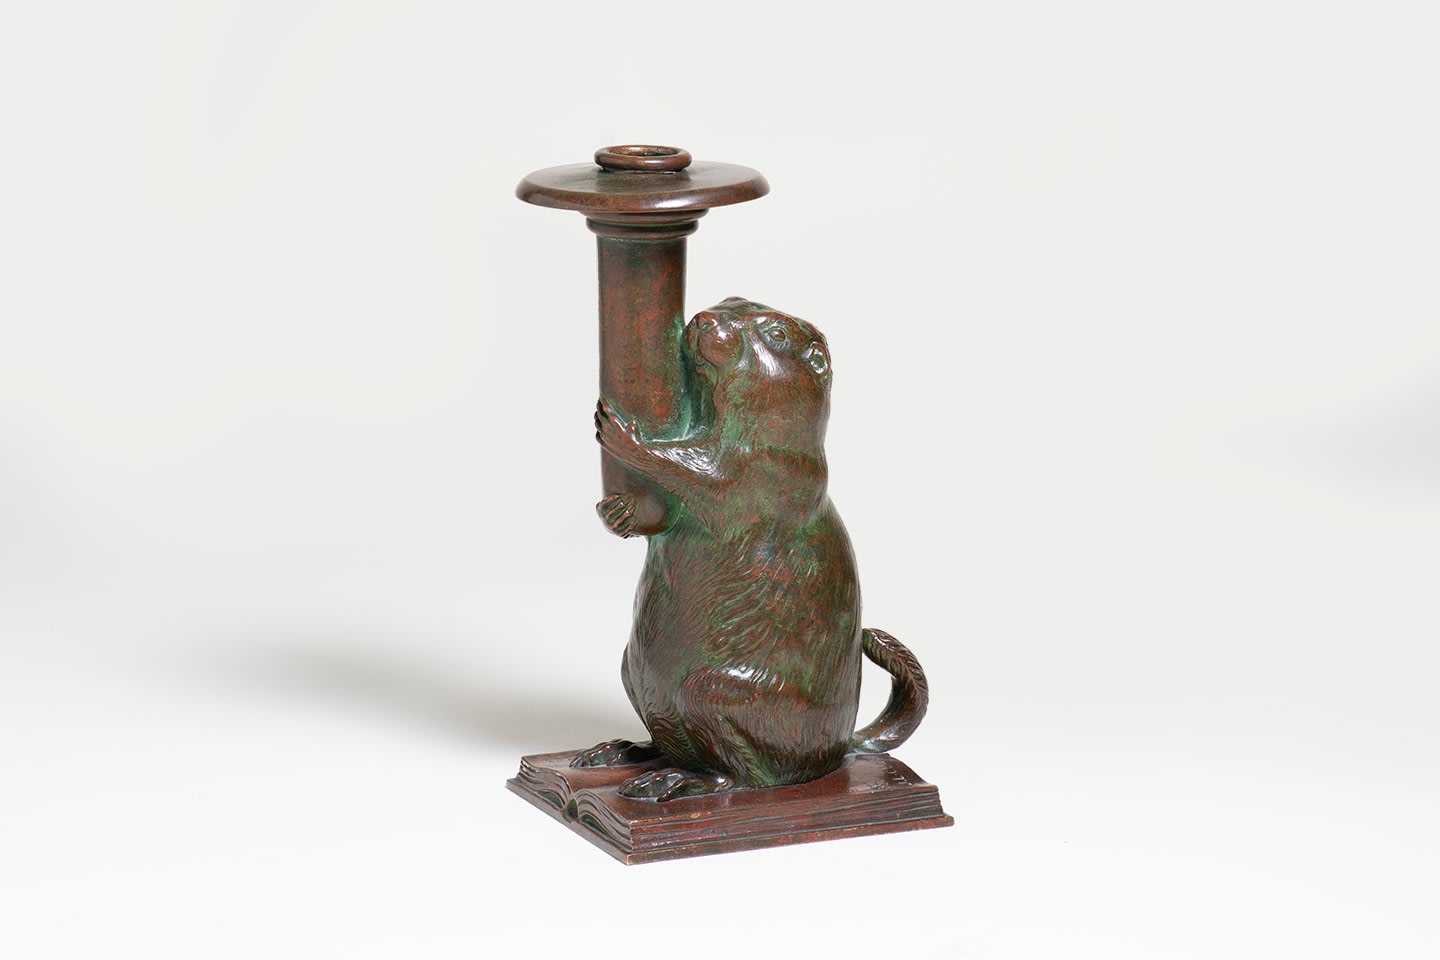 a bronze candlestick in the form of a groundhog standing on an open book, holding aloft the candle holder, by tiffany studios for the rowfant cub a cleveland bibliographic society